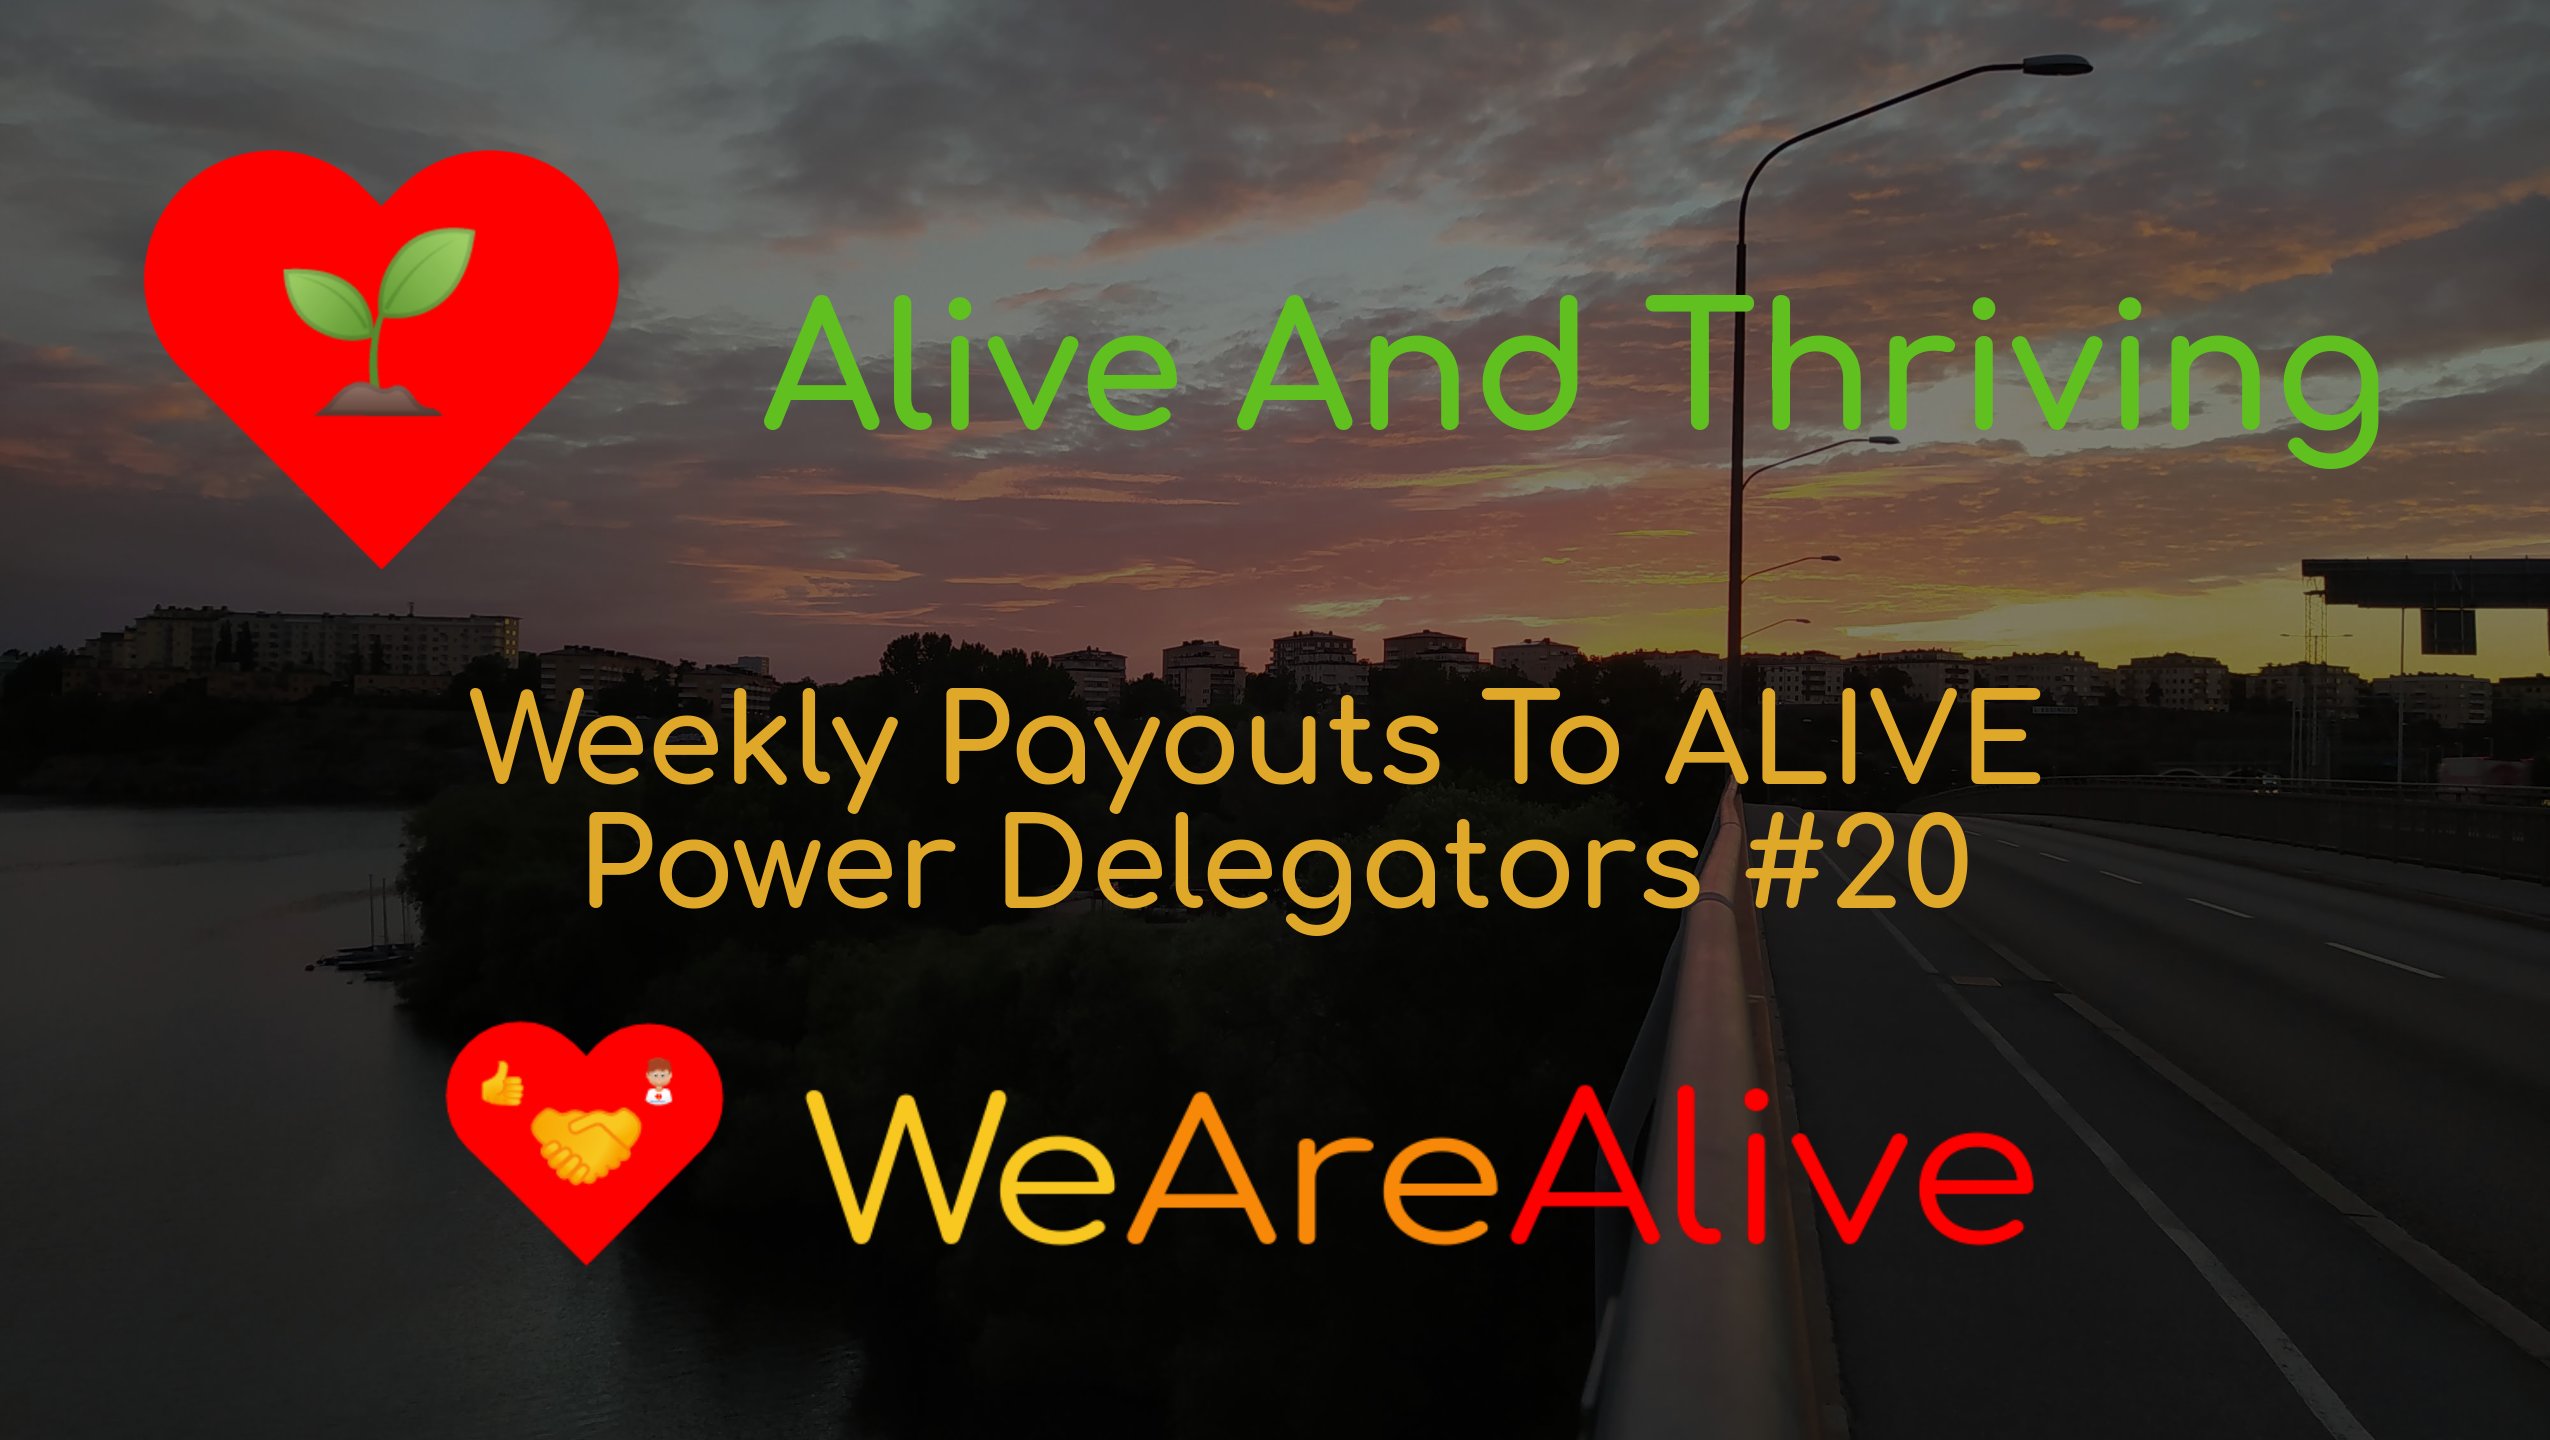 @wearealive/alive-and-thriving-weekly-payouts-to-alive-power-delegators-20